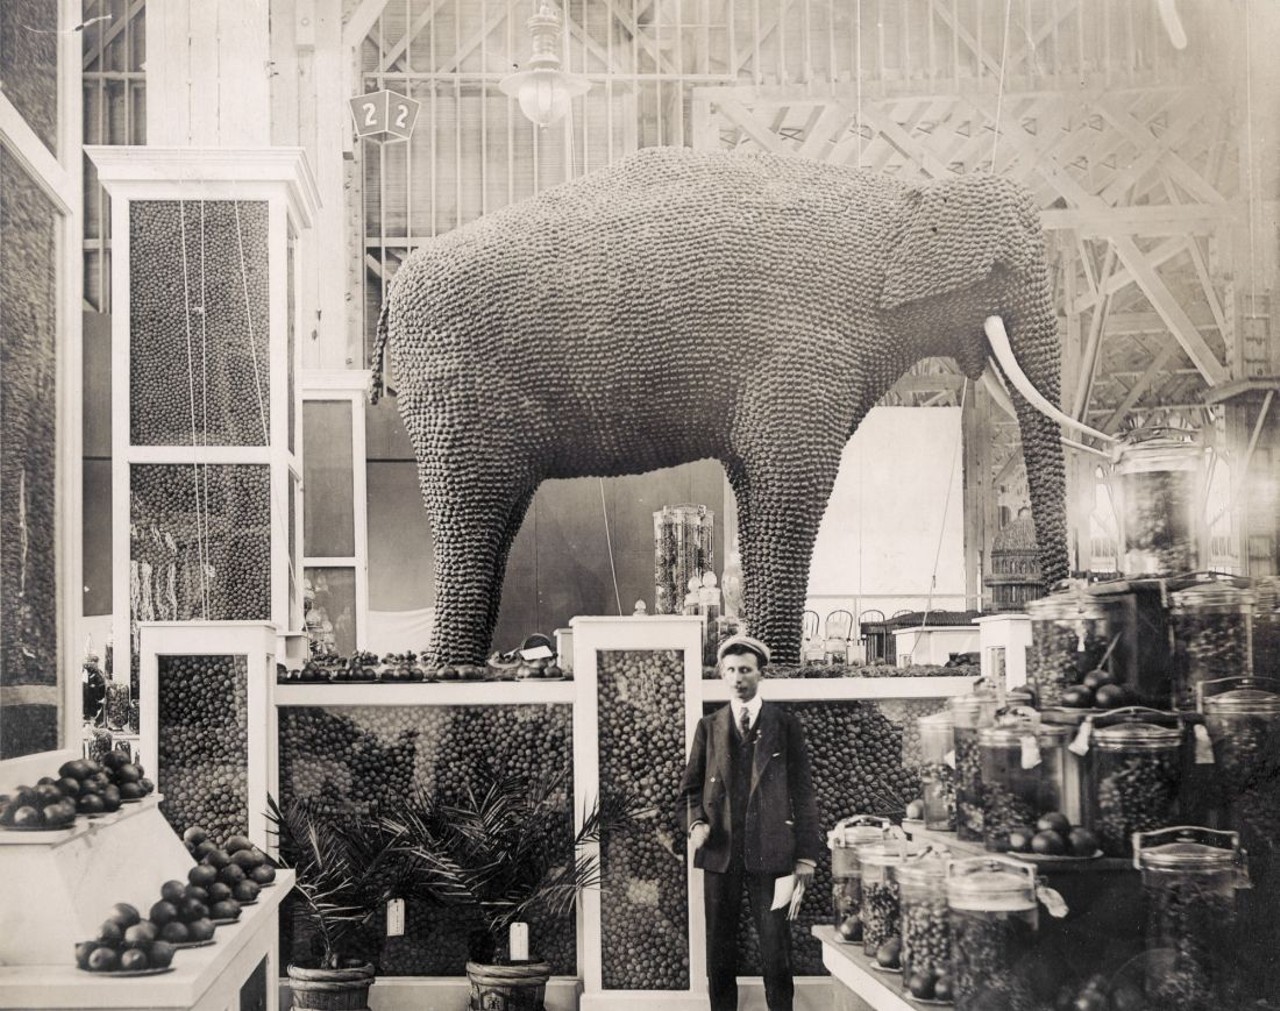 ELEPHANT MADE FROM ALMONDS IN THE CALIFORNIA EXHIBIT OF THE PALACE OF HORTICULTURE AT THE 1904 WORLD'S FAIR.
Find out more about this photo at MoHistory.org.